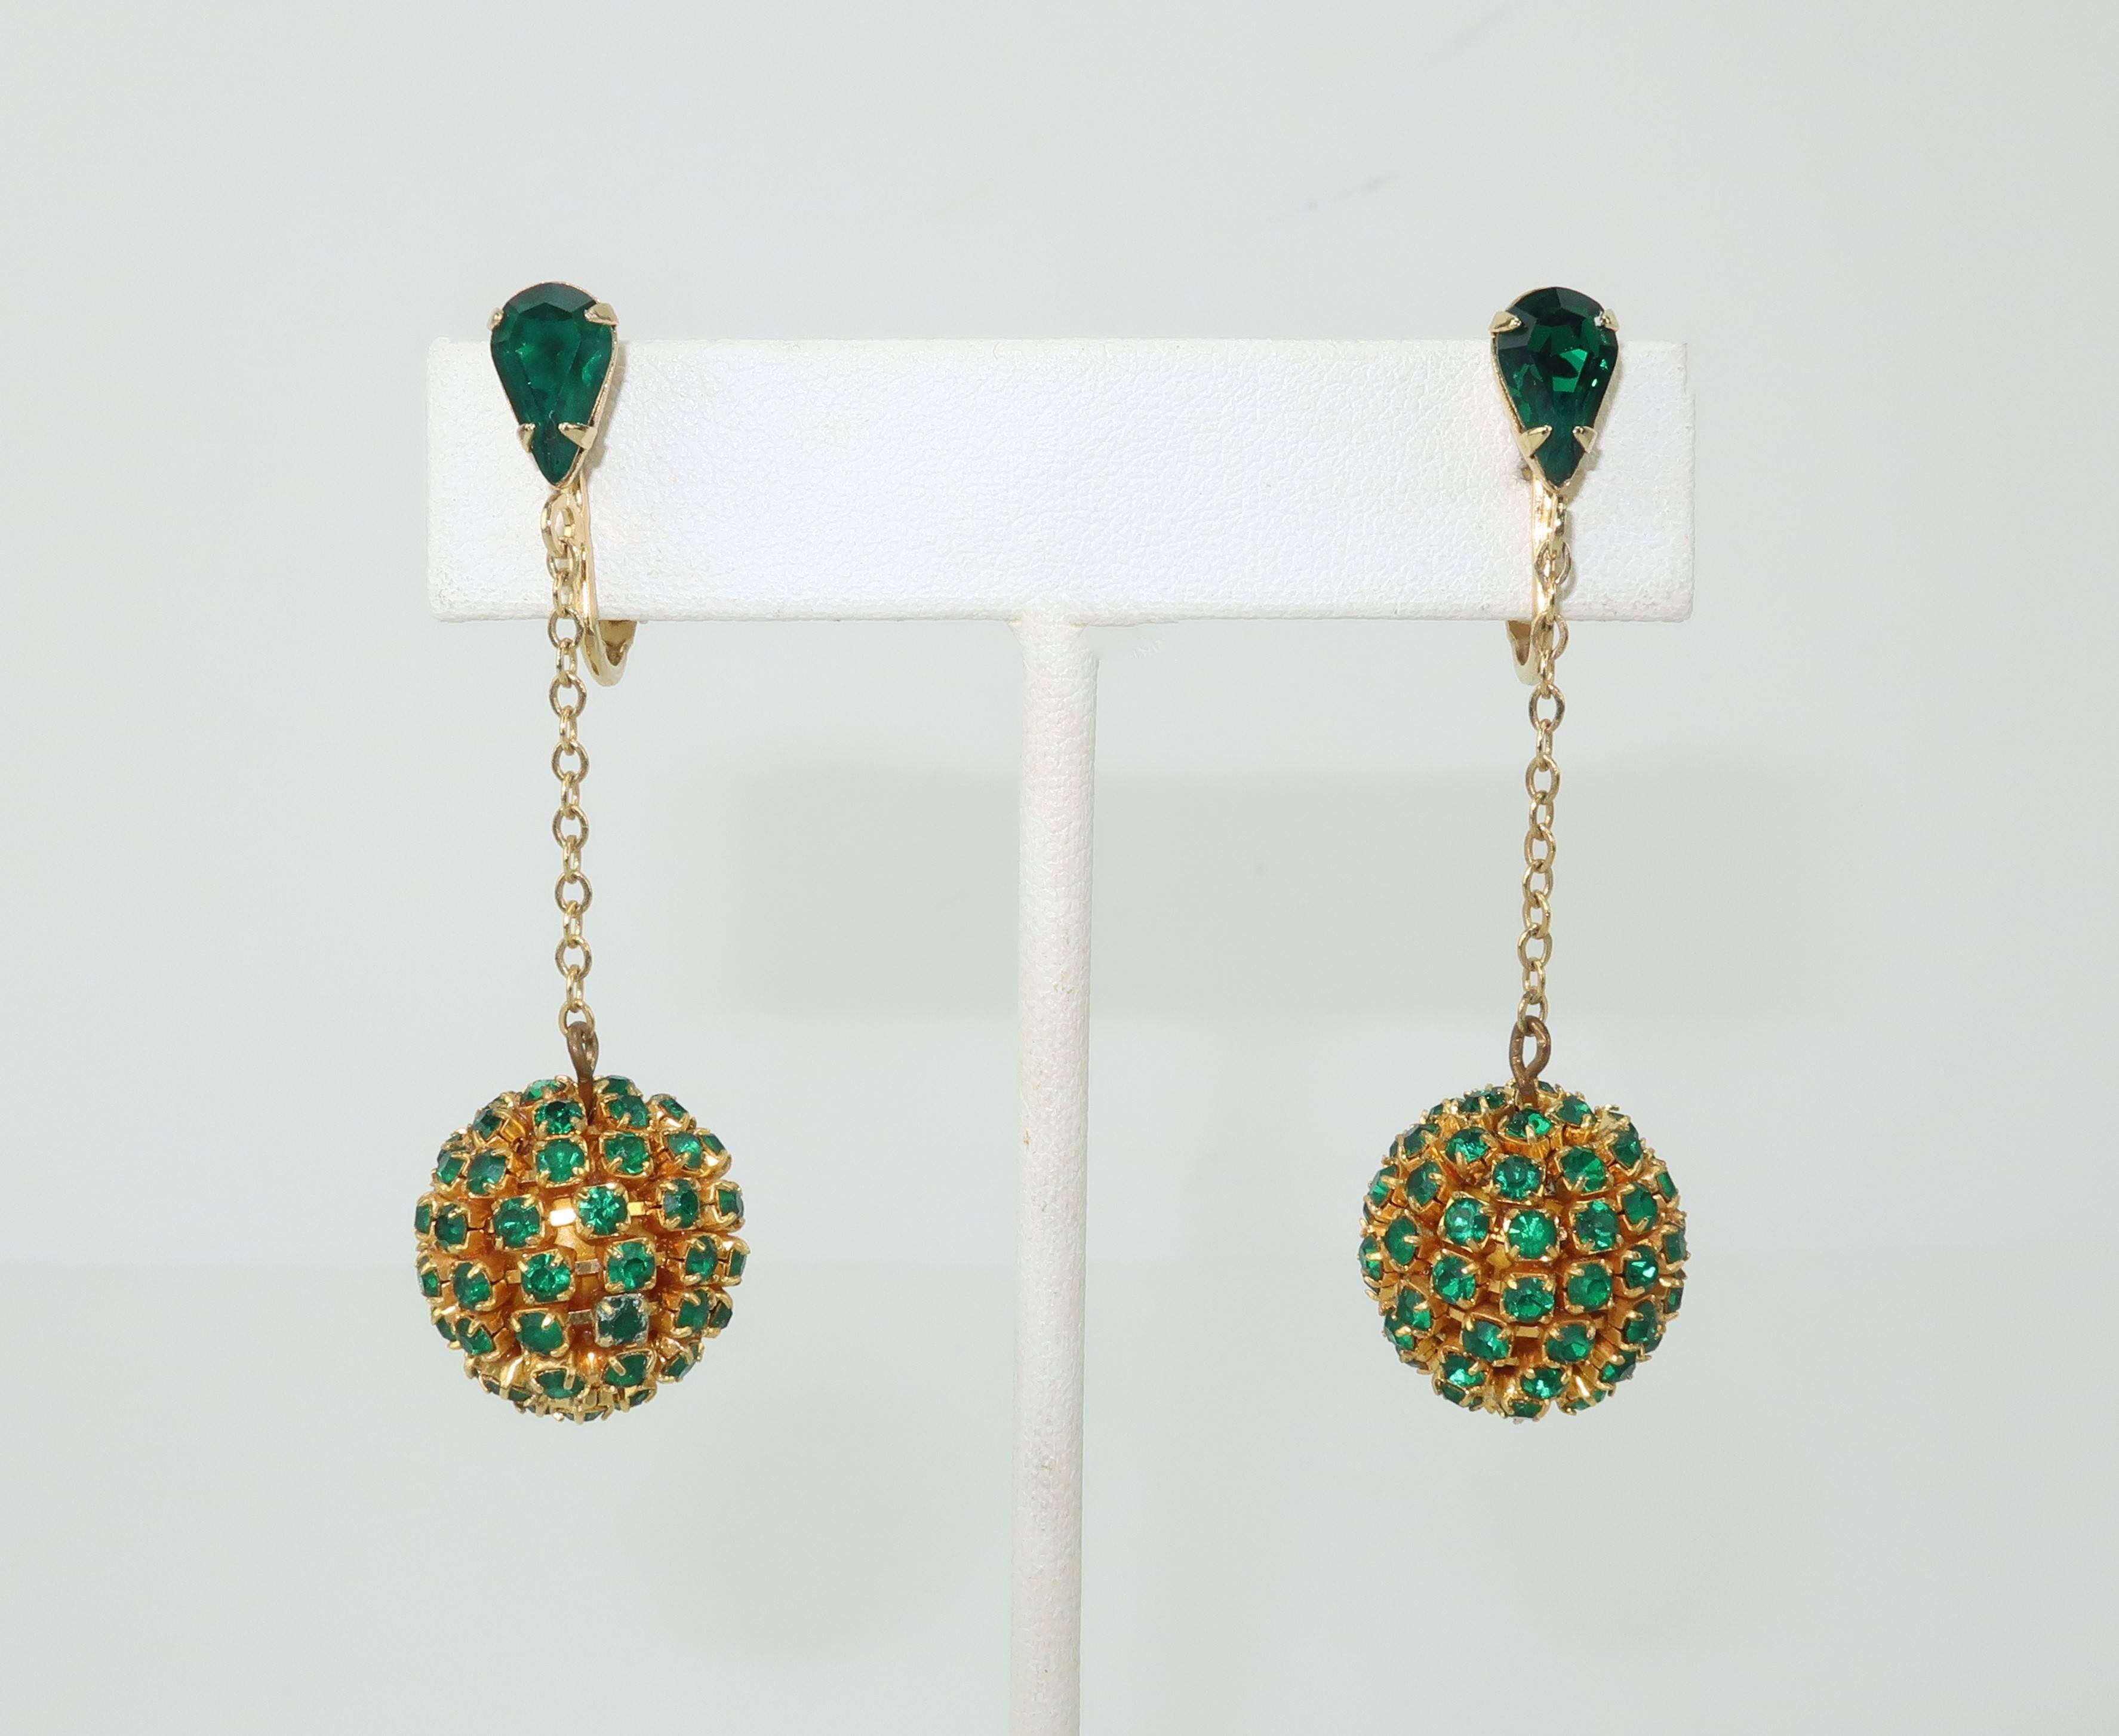 These delightful dangle earrings are akin to holiday ornaments for the ears.  Each earring consists of a gold tone orb fully encrusted with emerald green rhinestones suspended with a delicate chain attached to a teardrop shaped rhinestone base.  The